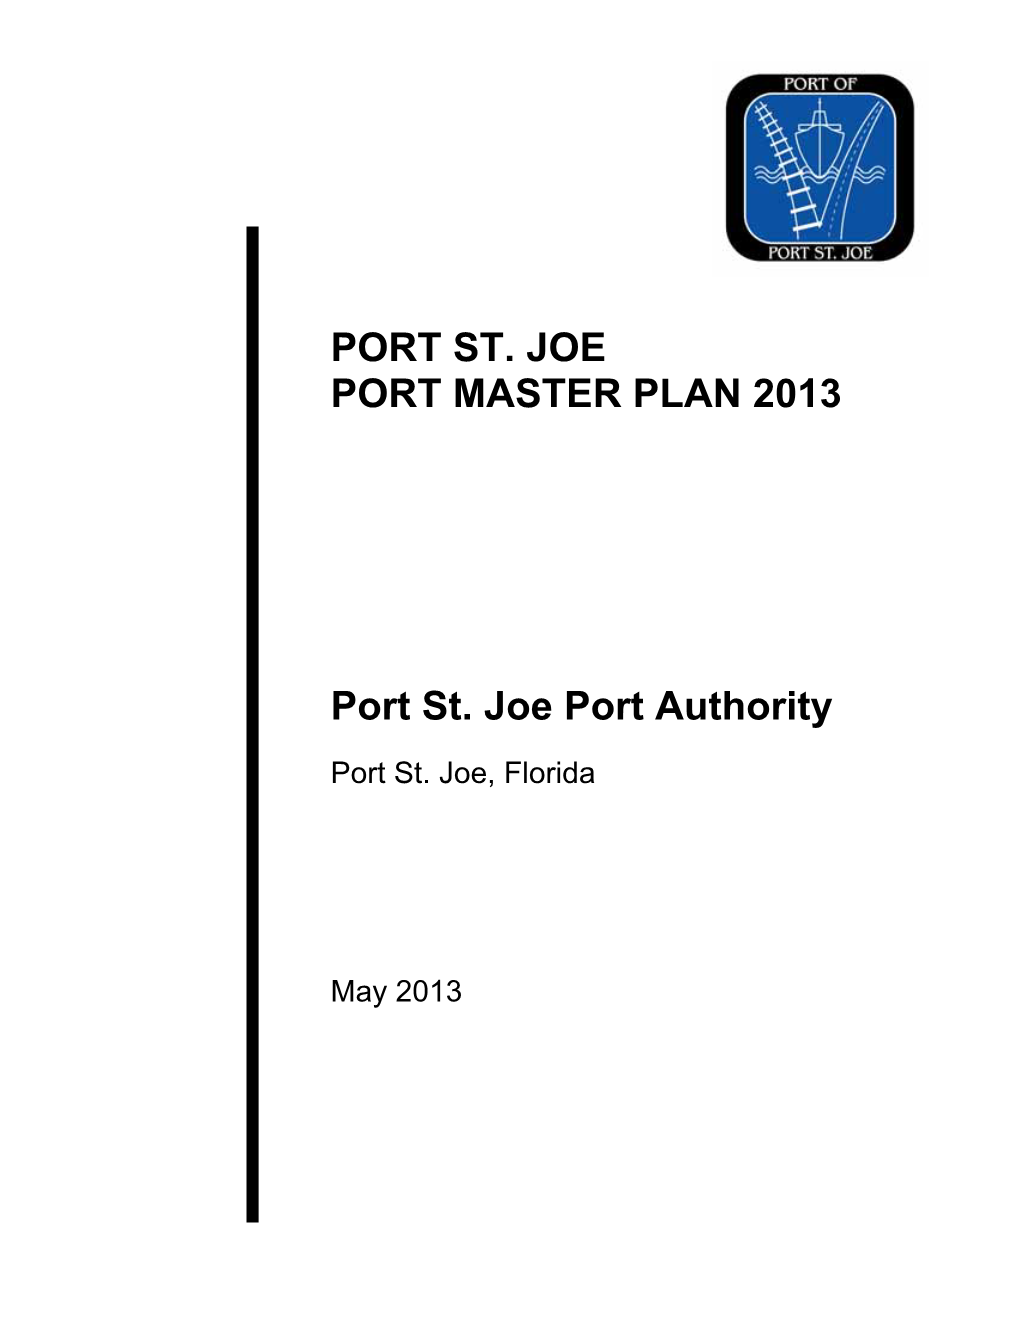 Adopted Port Master Plan 2013